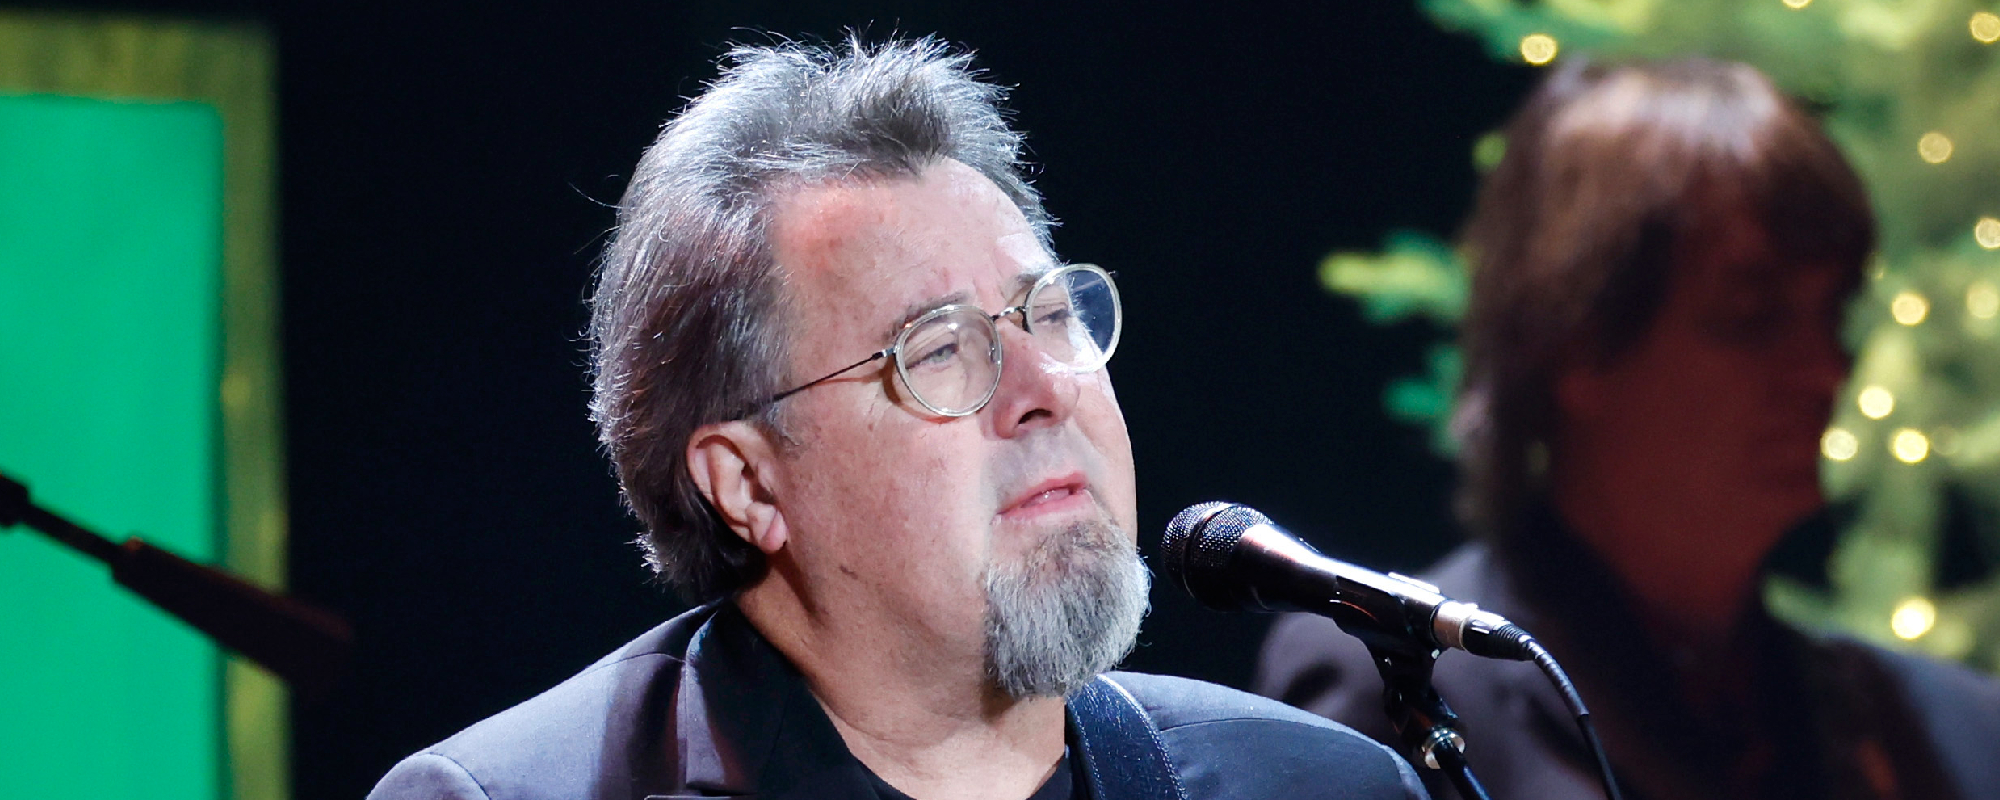 Vince Gill Shares Why He Needed a Great Deal of “Restraint” When Performing With the Eagles